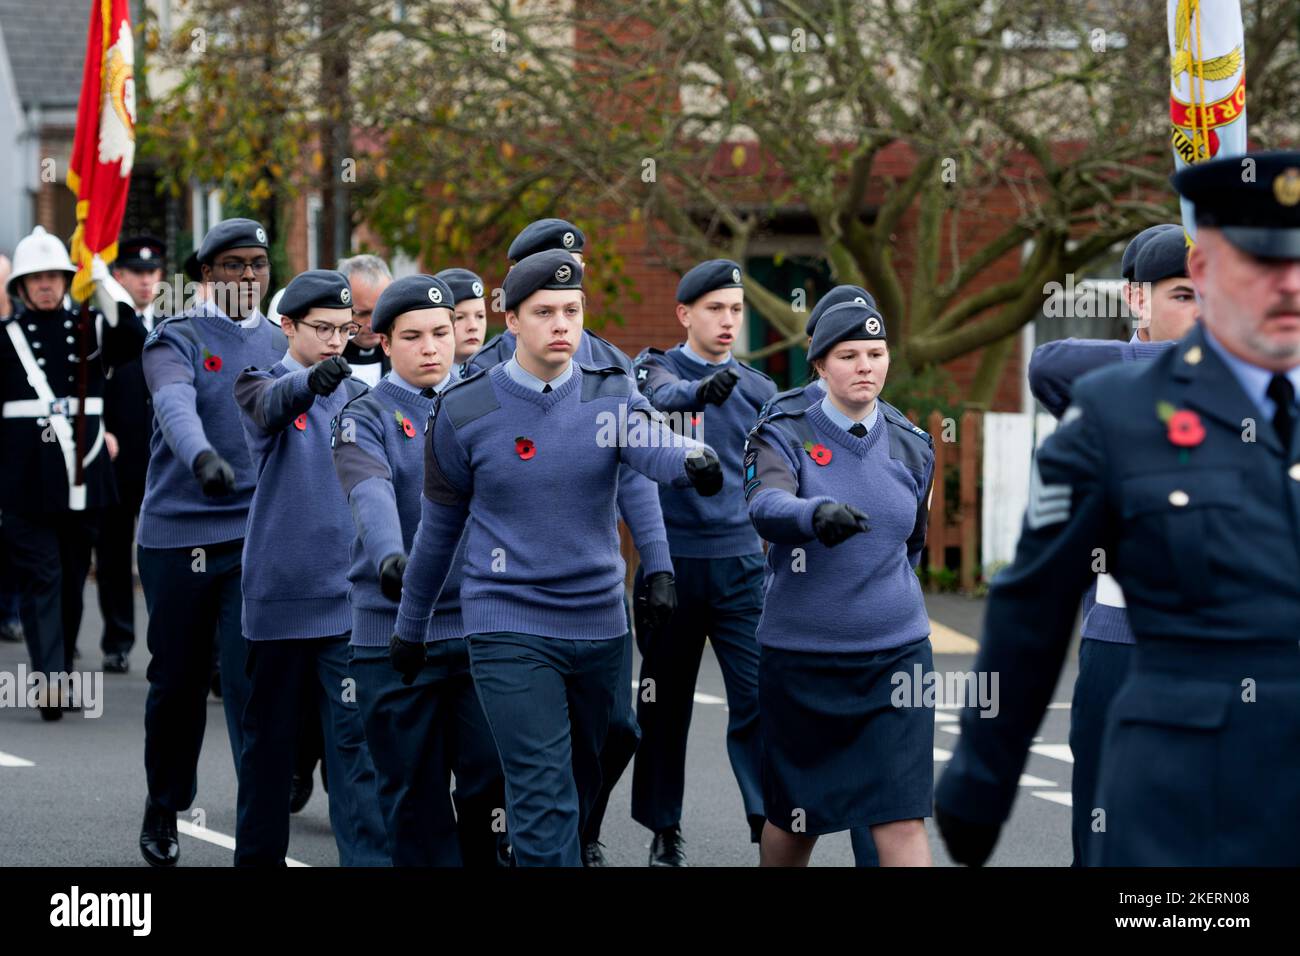 Air cadets in the parade at Kenilworth Remembrance Sunday, Warwickshire, England, UK Stock Photo